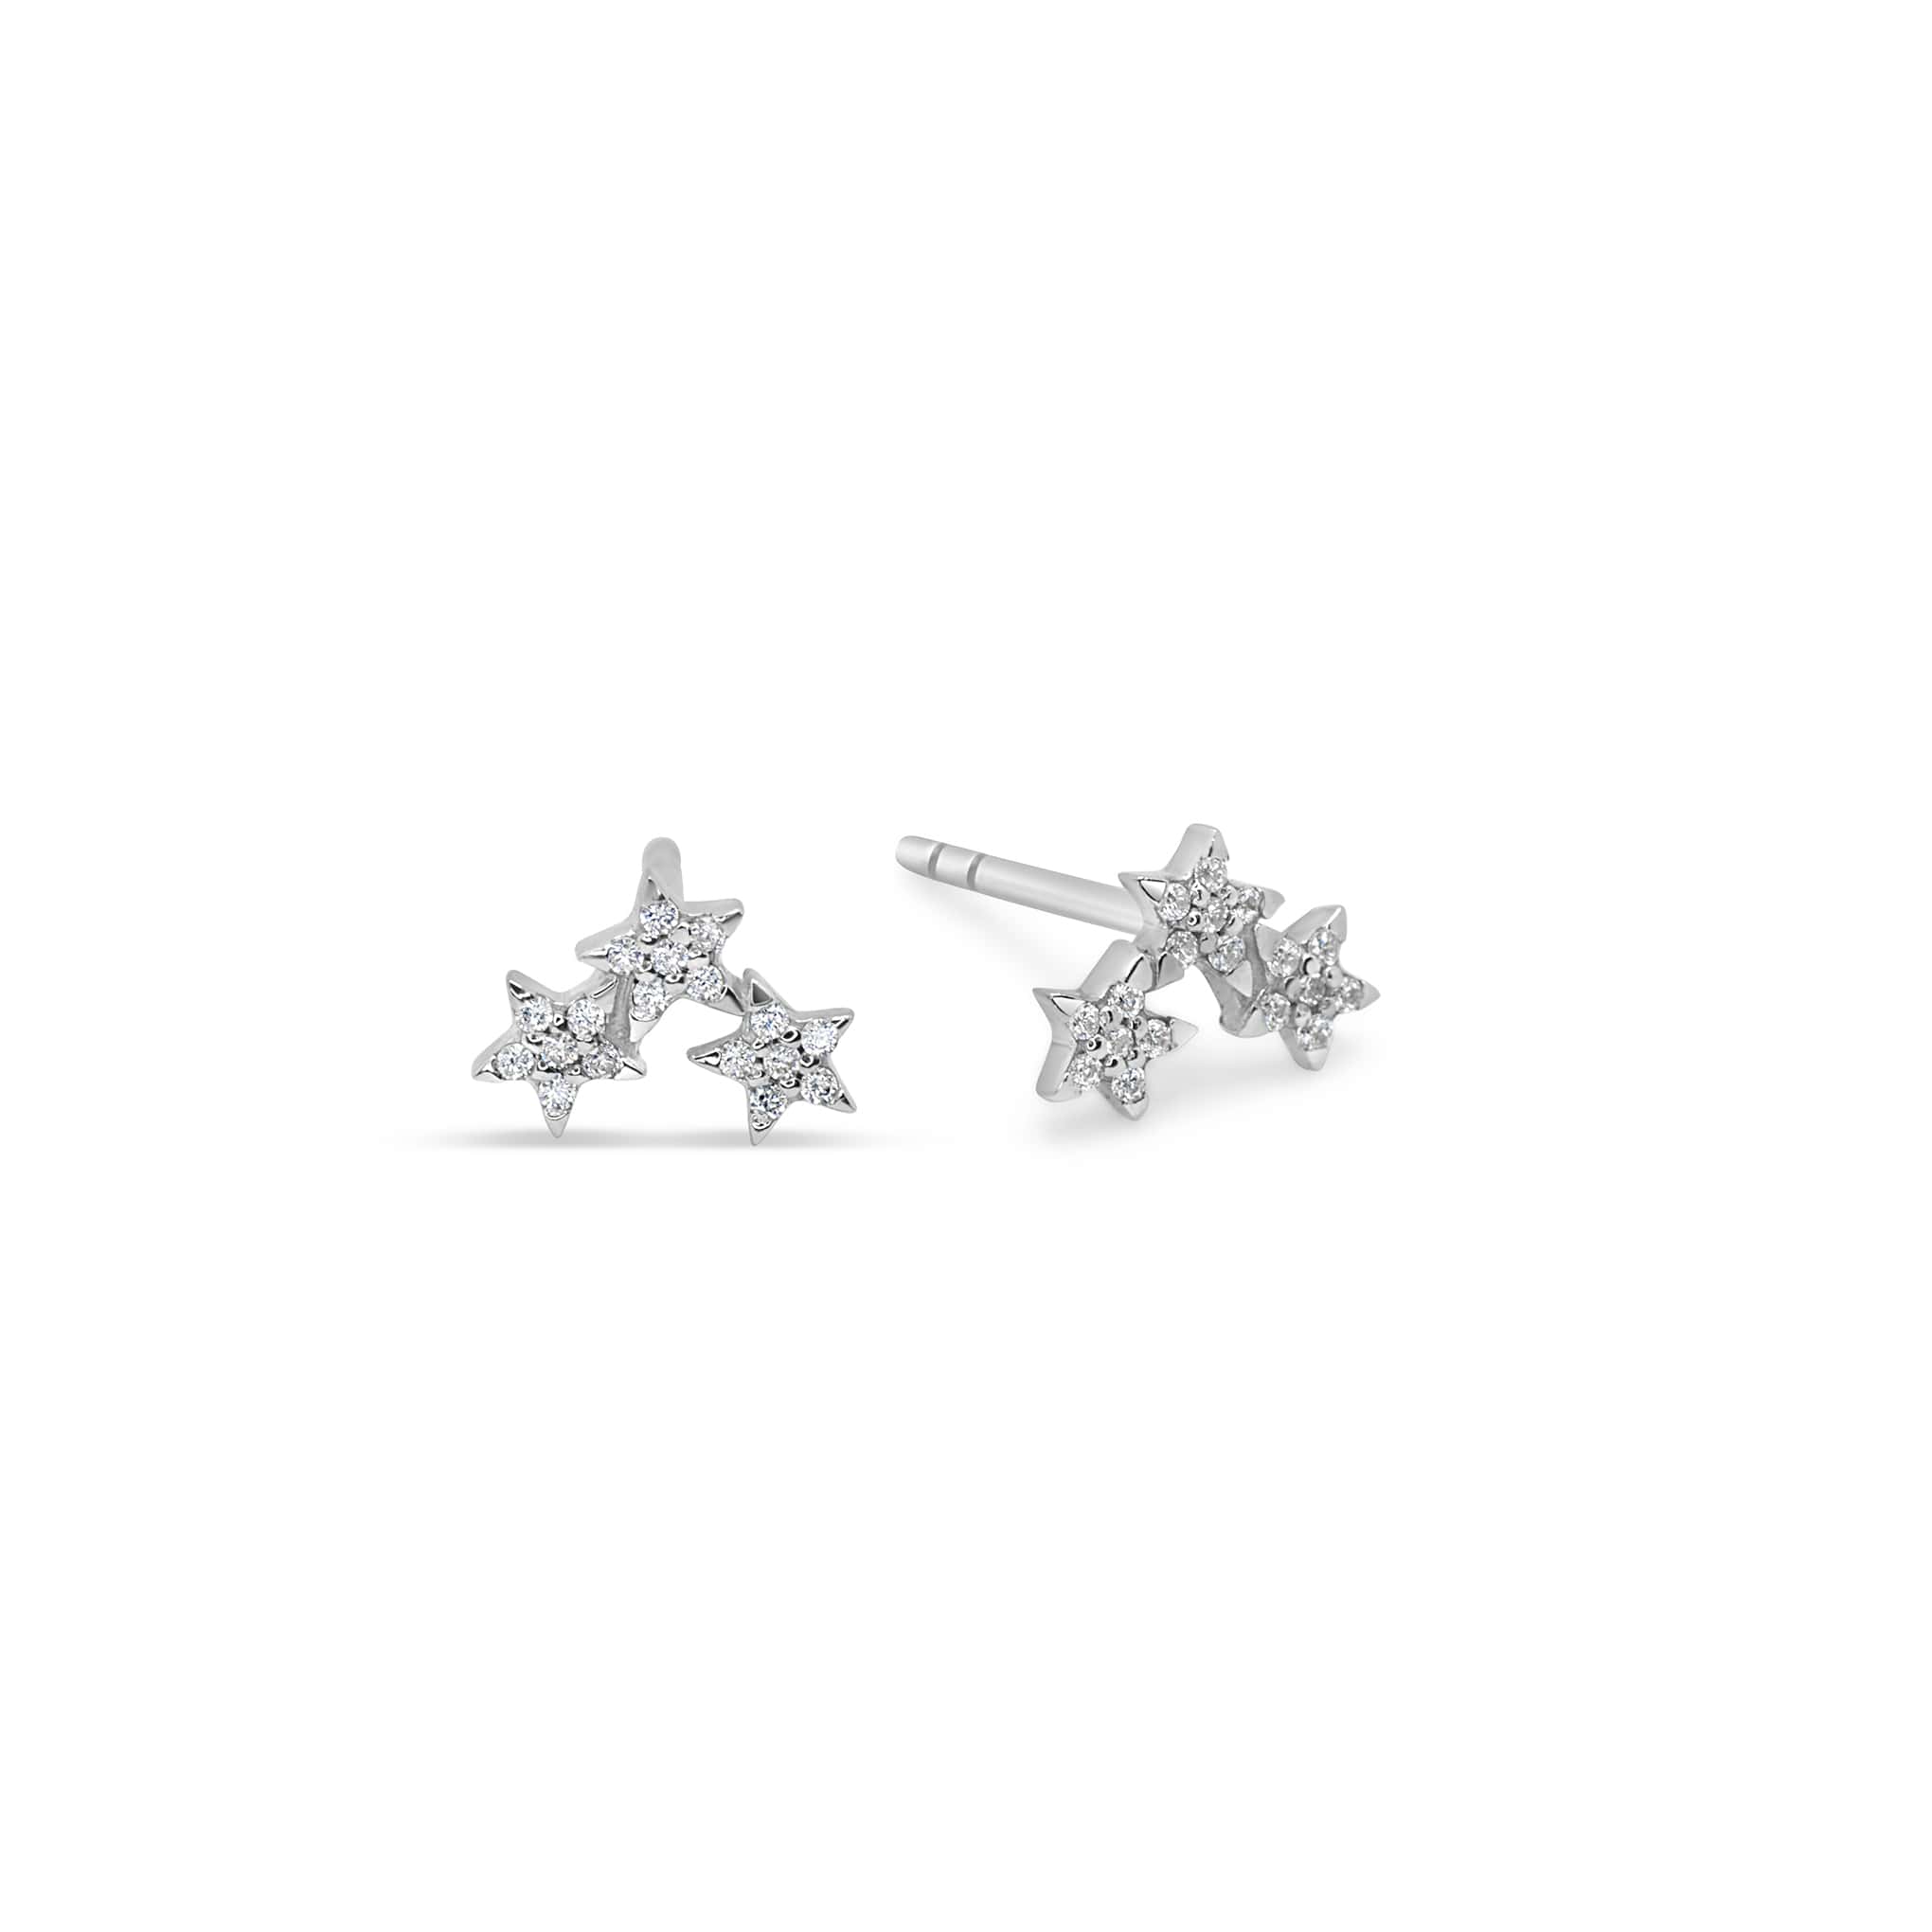 Small silver star cluster earrings